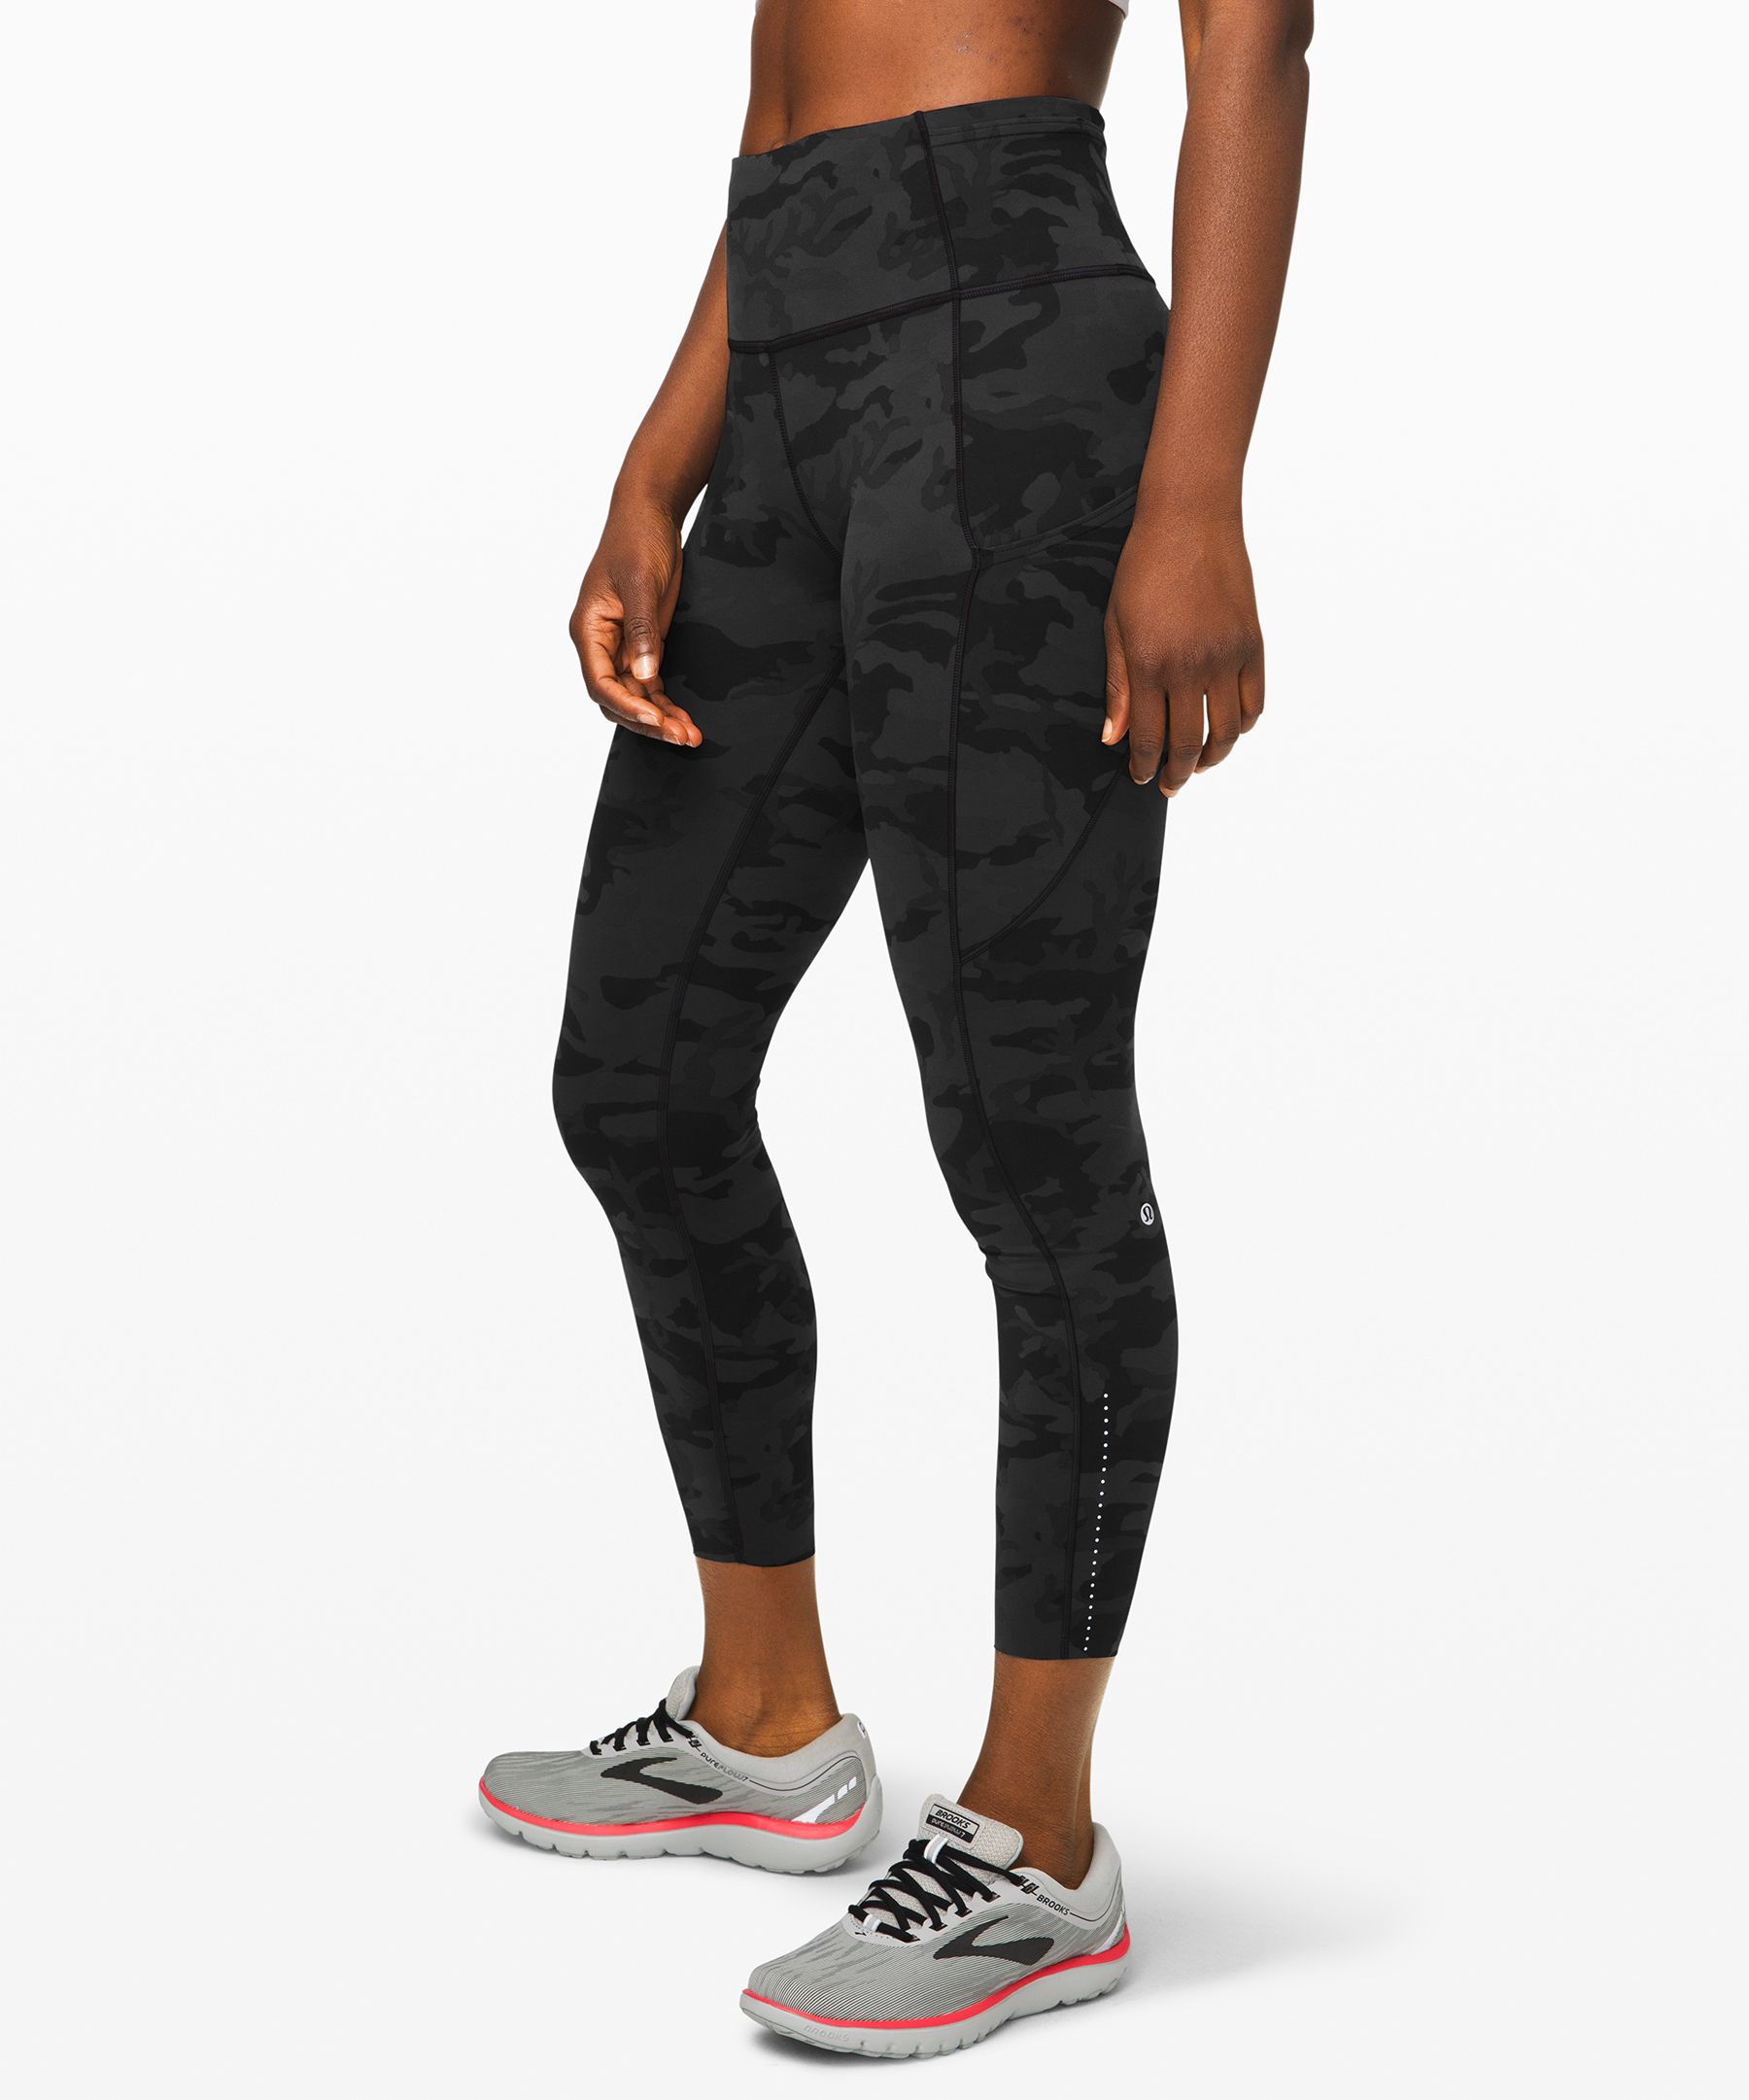 Fast and Free Tight 25 Reflective Nulux